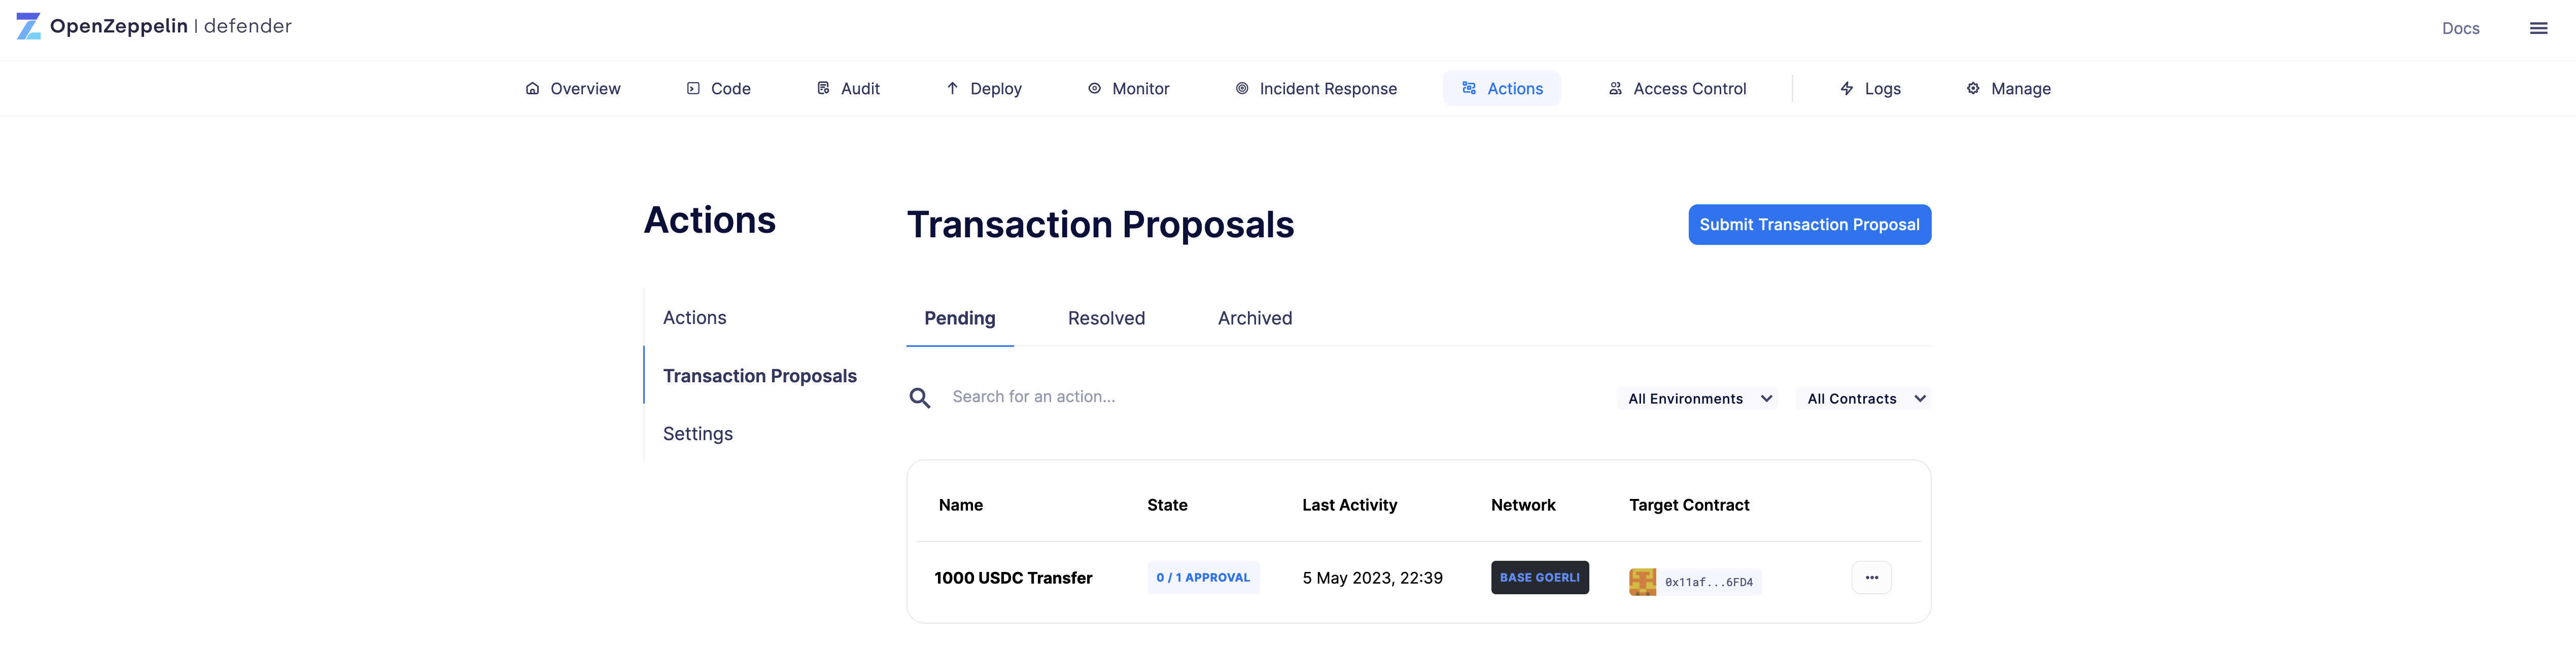 Transaction Proposals - formerly Admin proposals